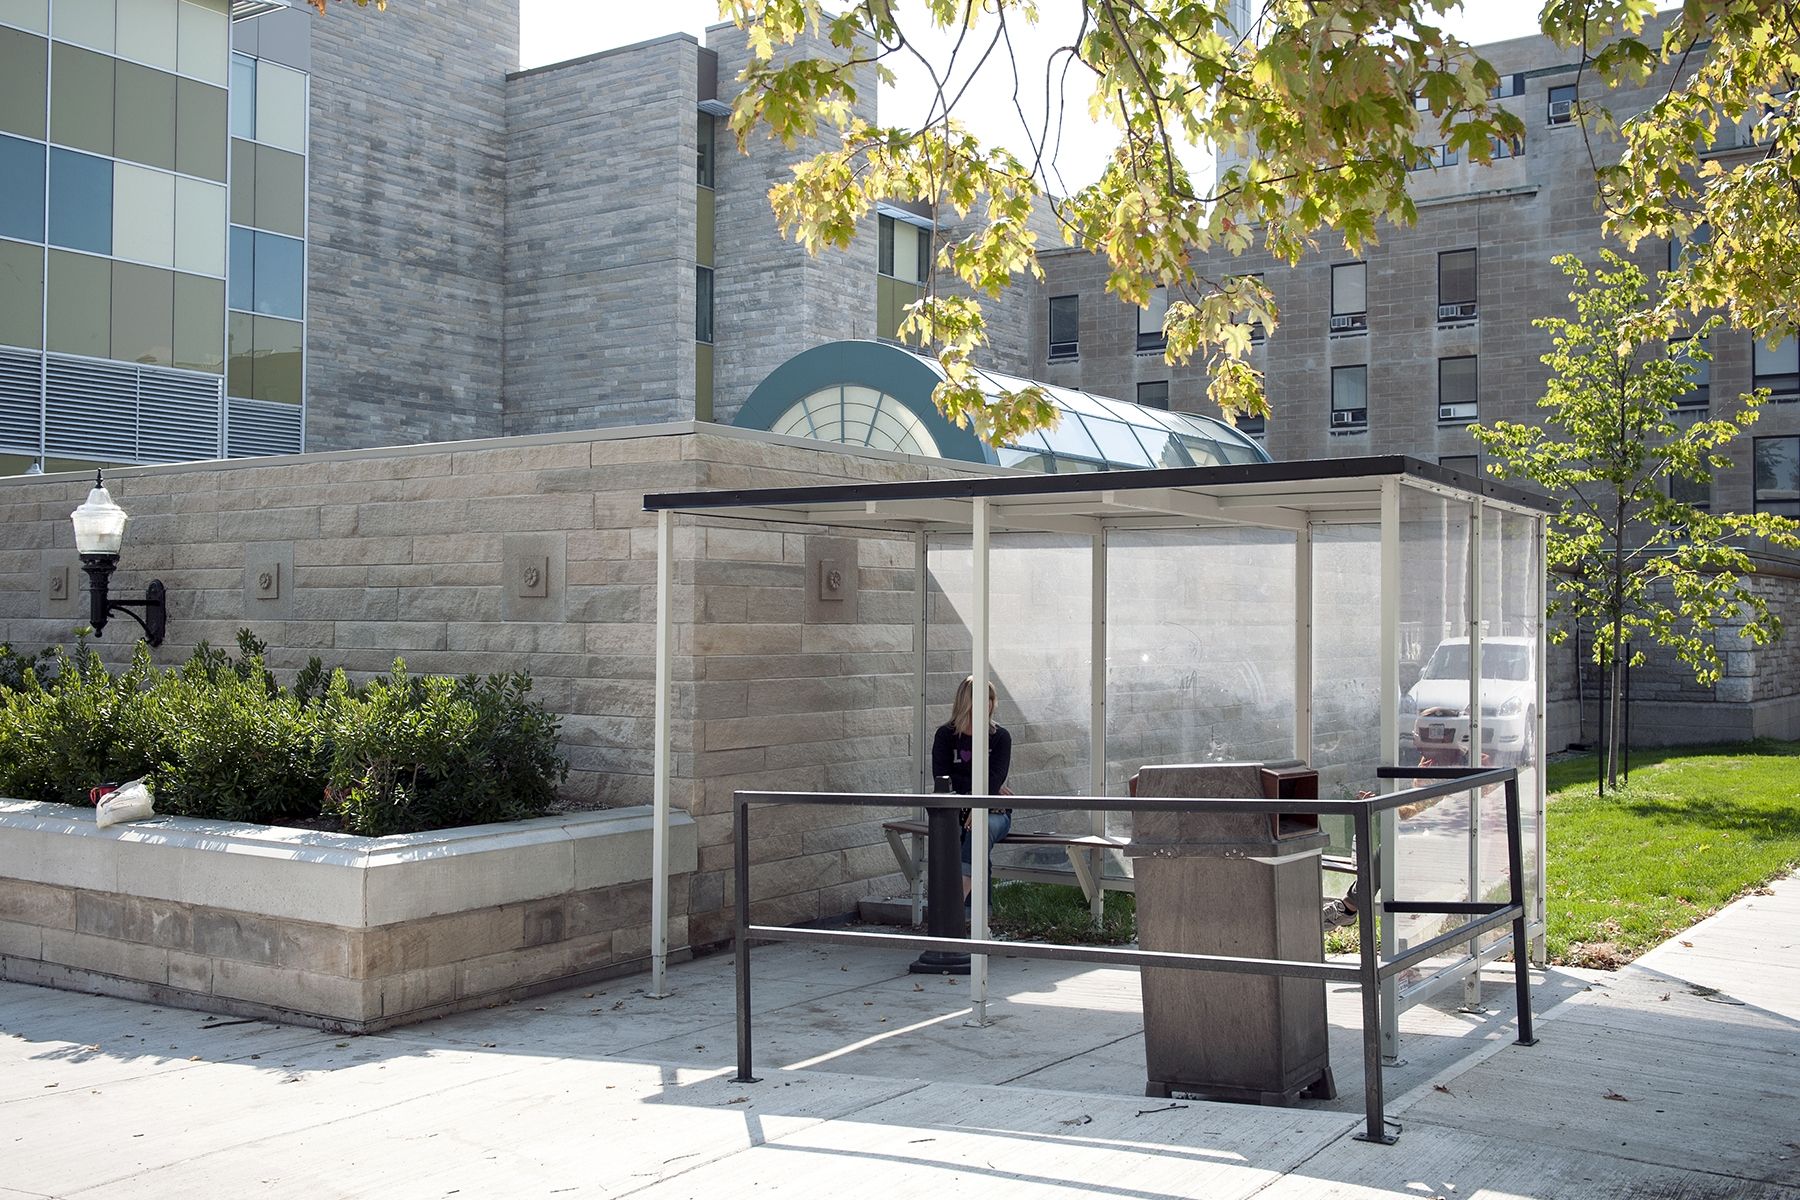 Smoking shelters to be part of new KGH smoking policy